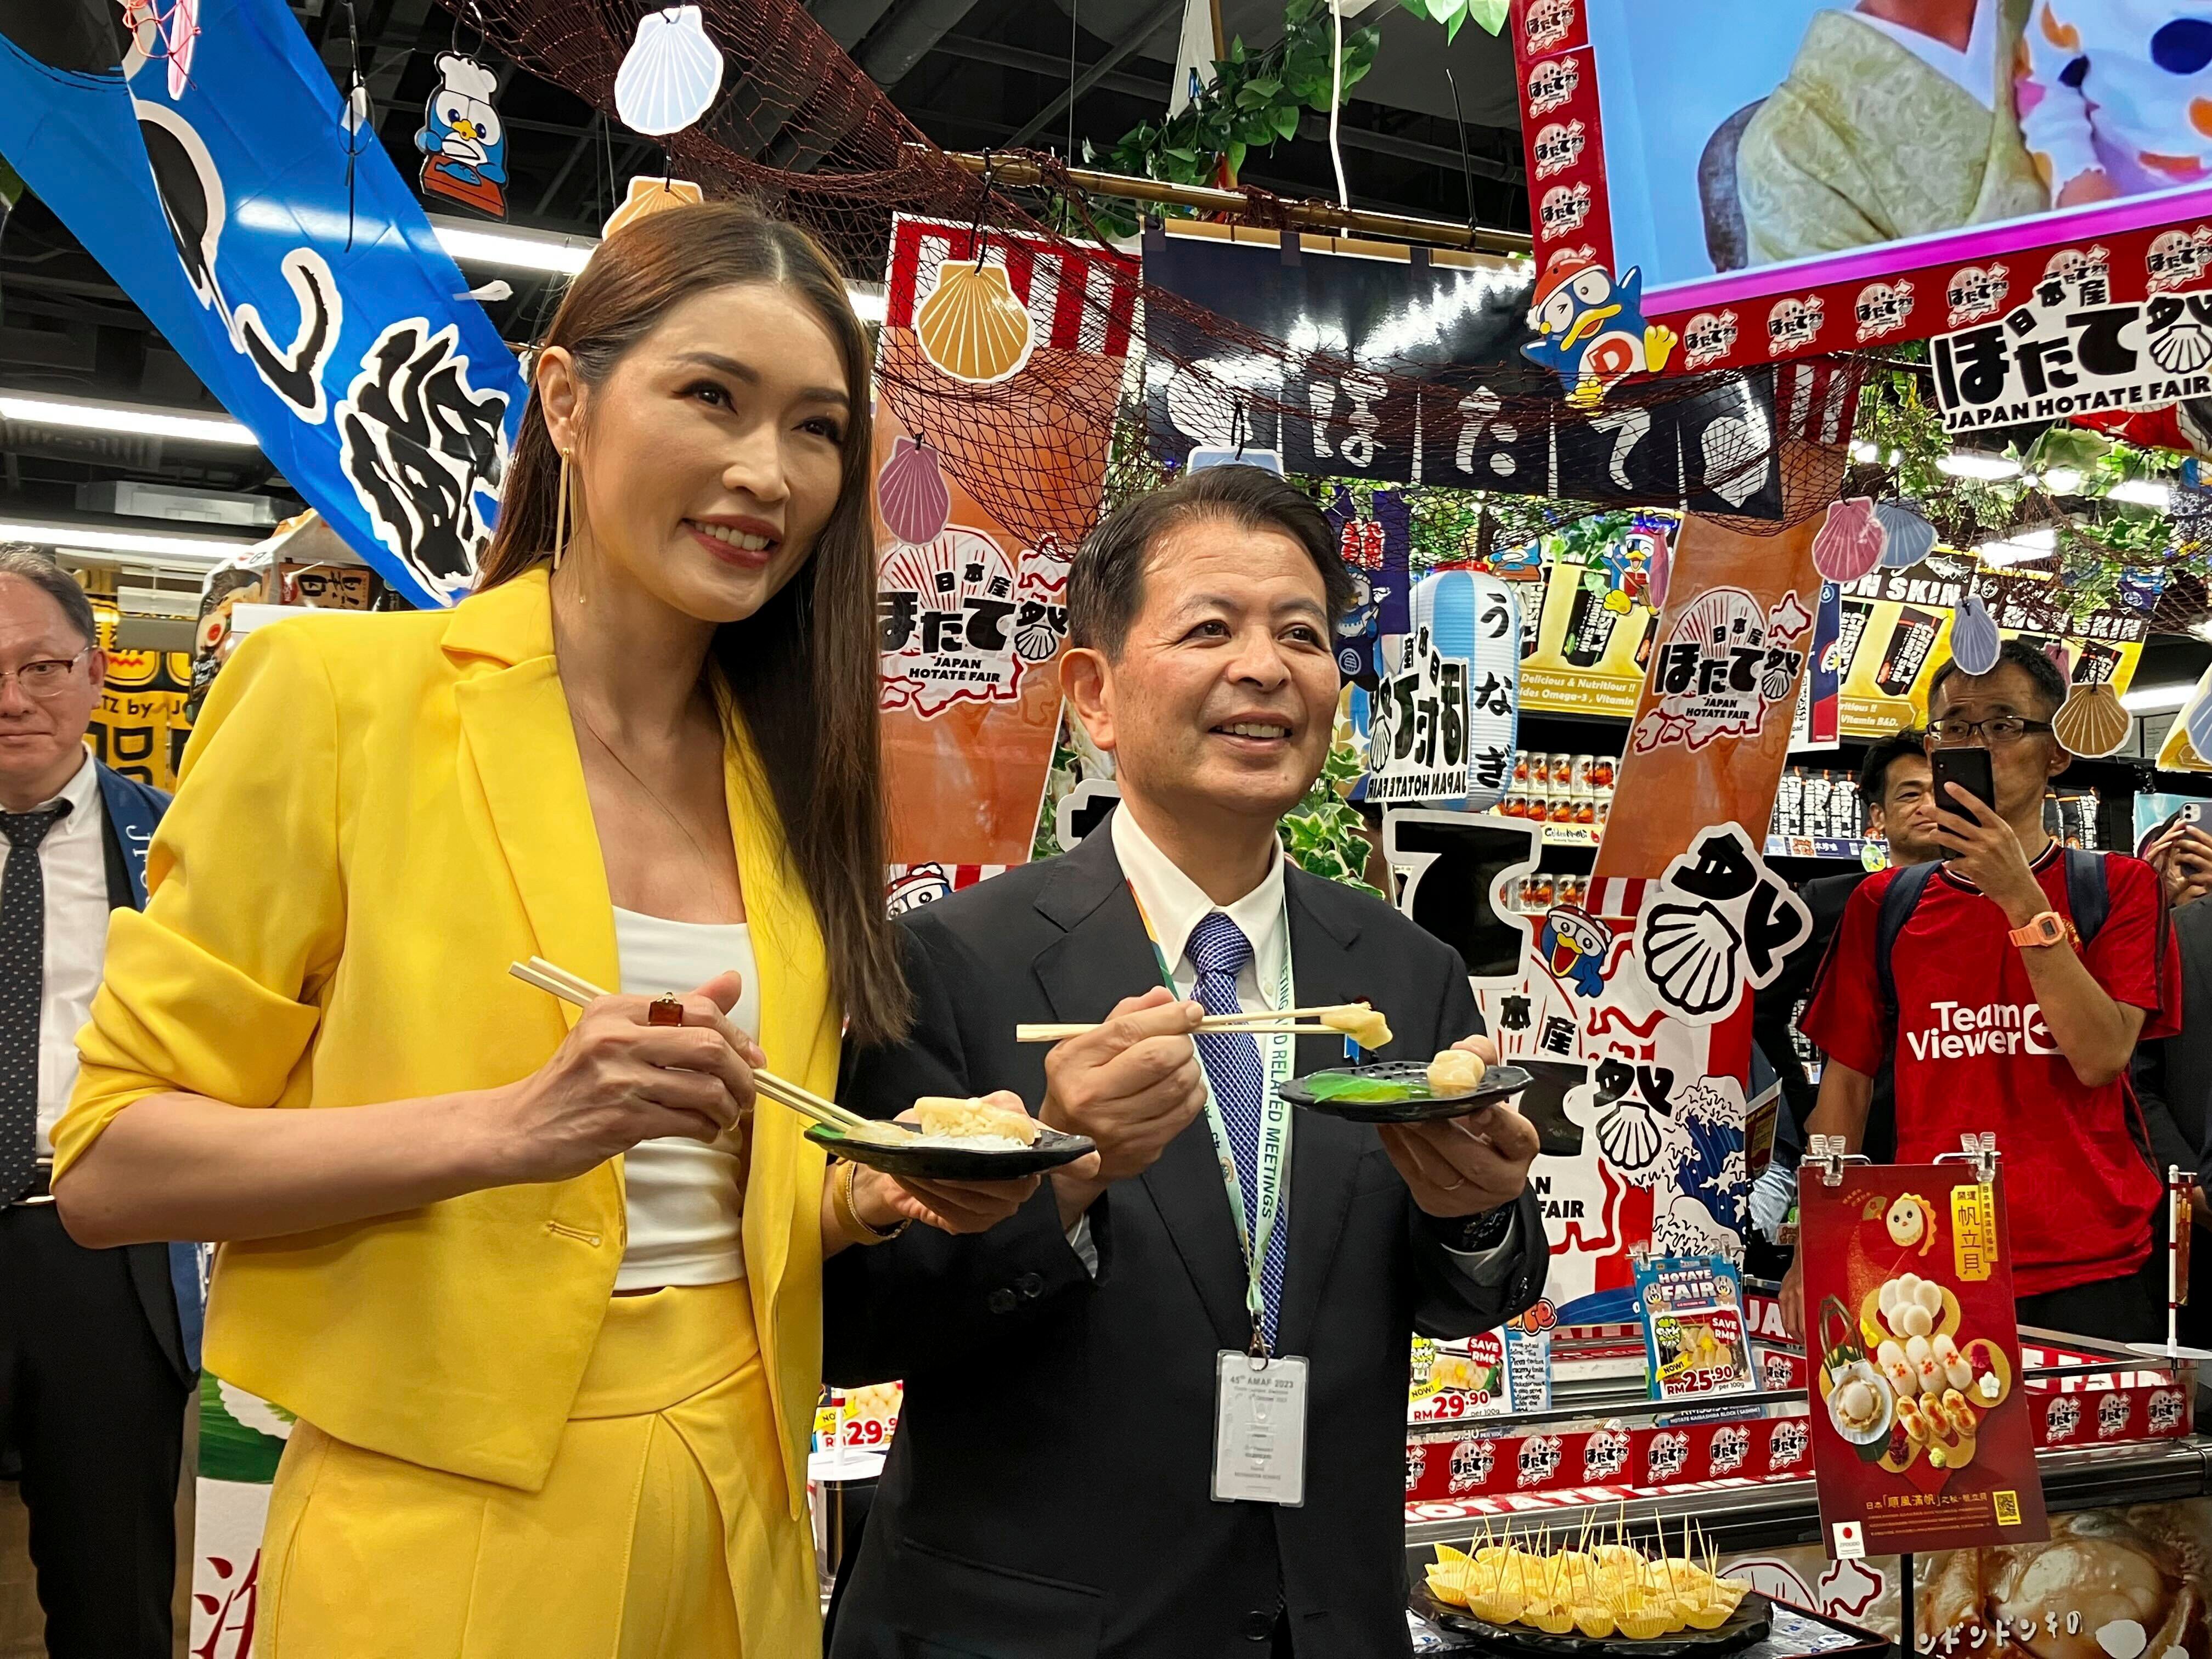 Japanese Agriculture Minister Ichiro Miyashita and Malaysian celebrity Amber Chia promote Japanese scallops to shoppers at a Don Don Donki outlet in Kuala Lumpur on October 4. Photo: AP